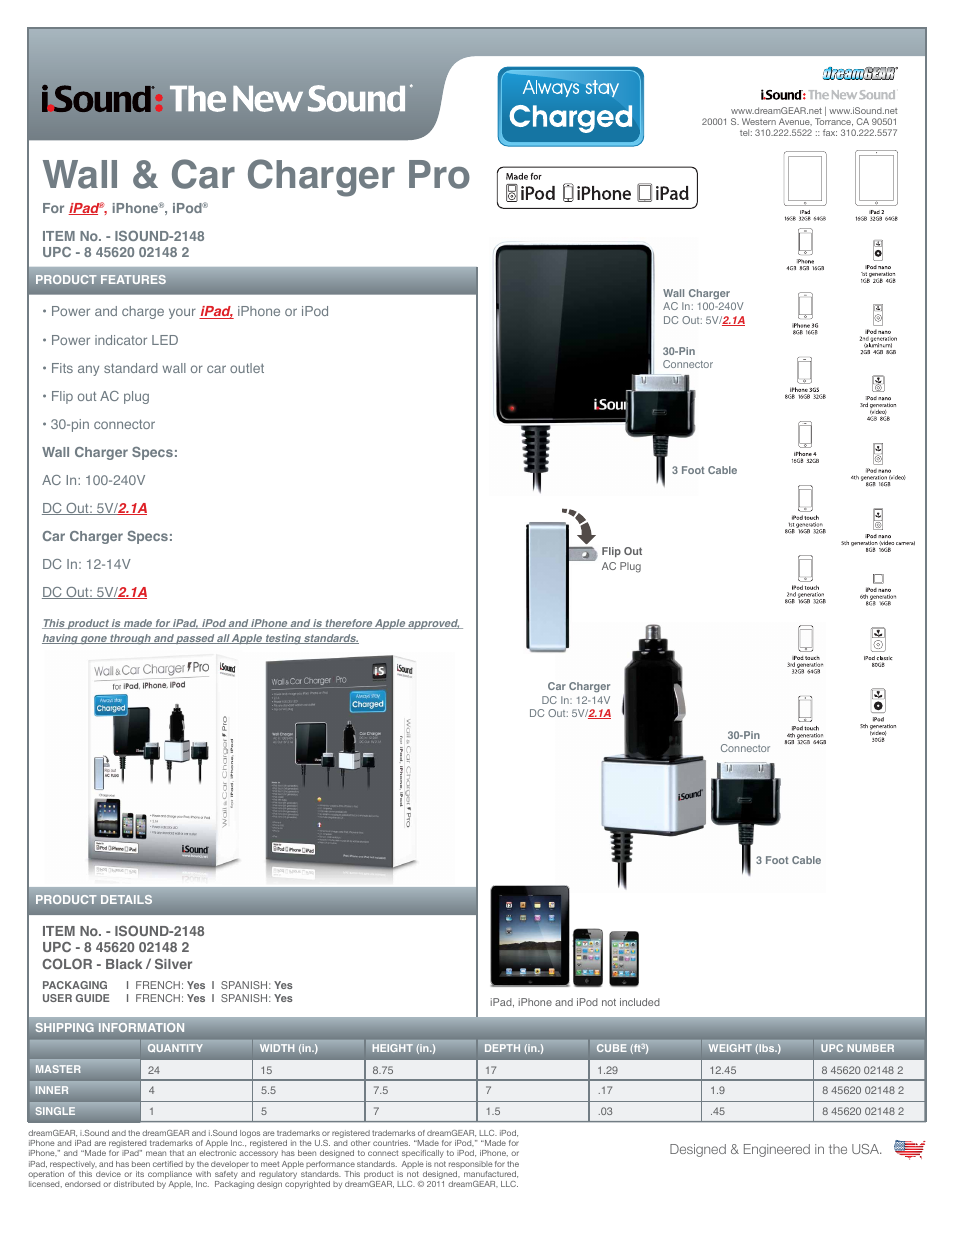 Wall & Car Charger Pro for iPad, iPhone and iPod - Sell Sheet